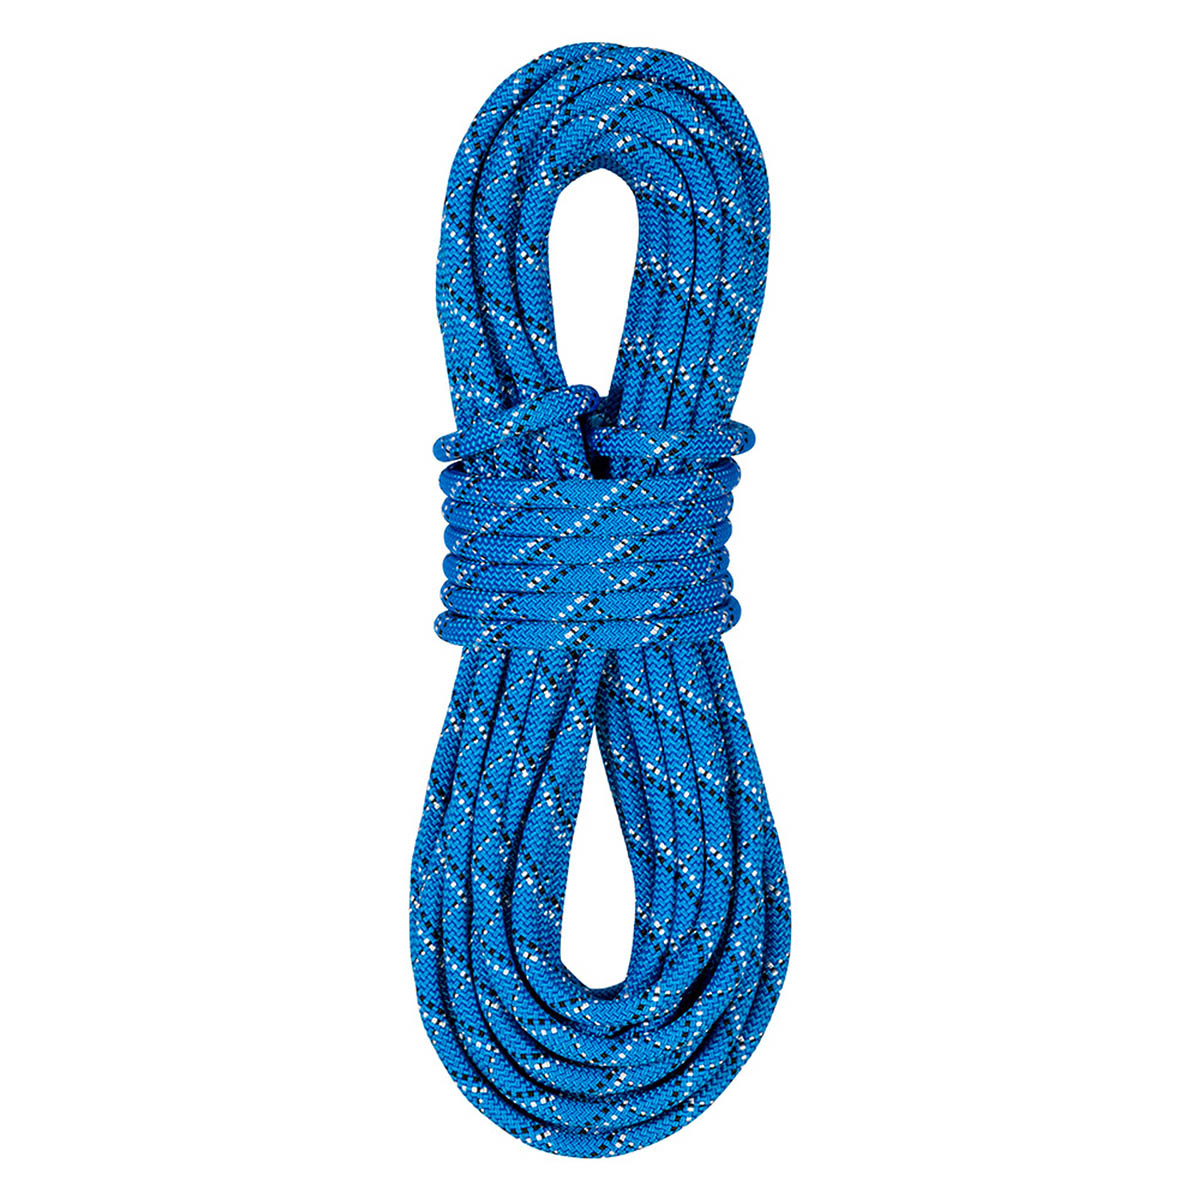 https://worknrescue.ca/wp-content/uploads/2022/08/sterling-11mm-sync-static-rope-nfpa-g-rated-blue.jpg